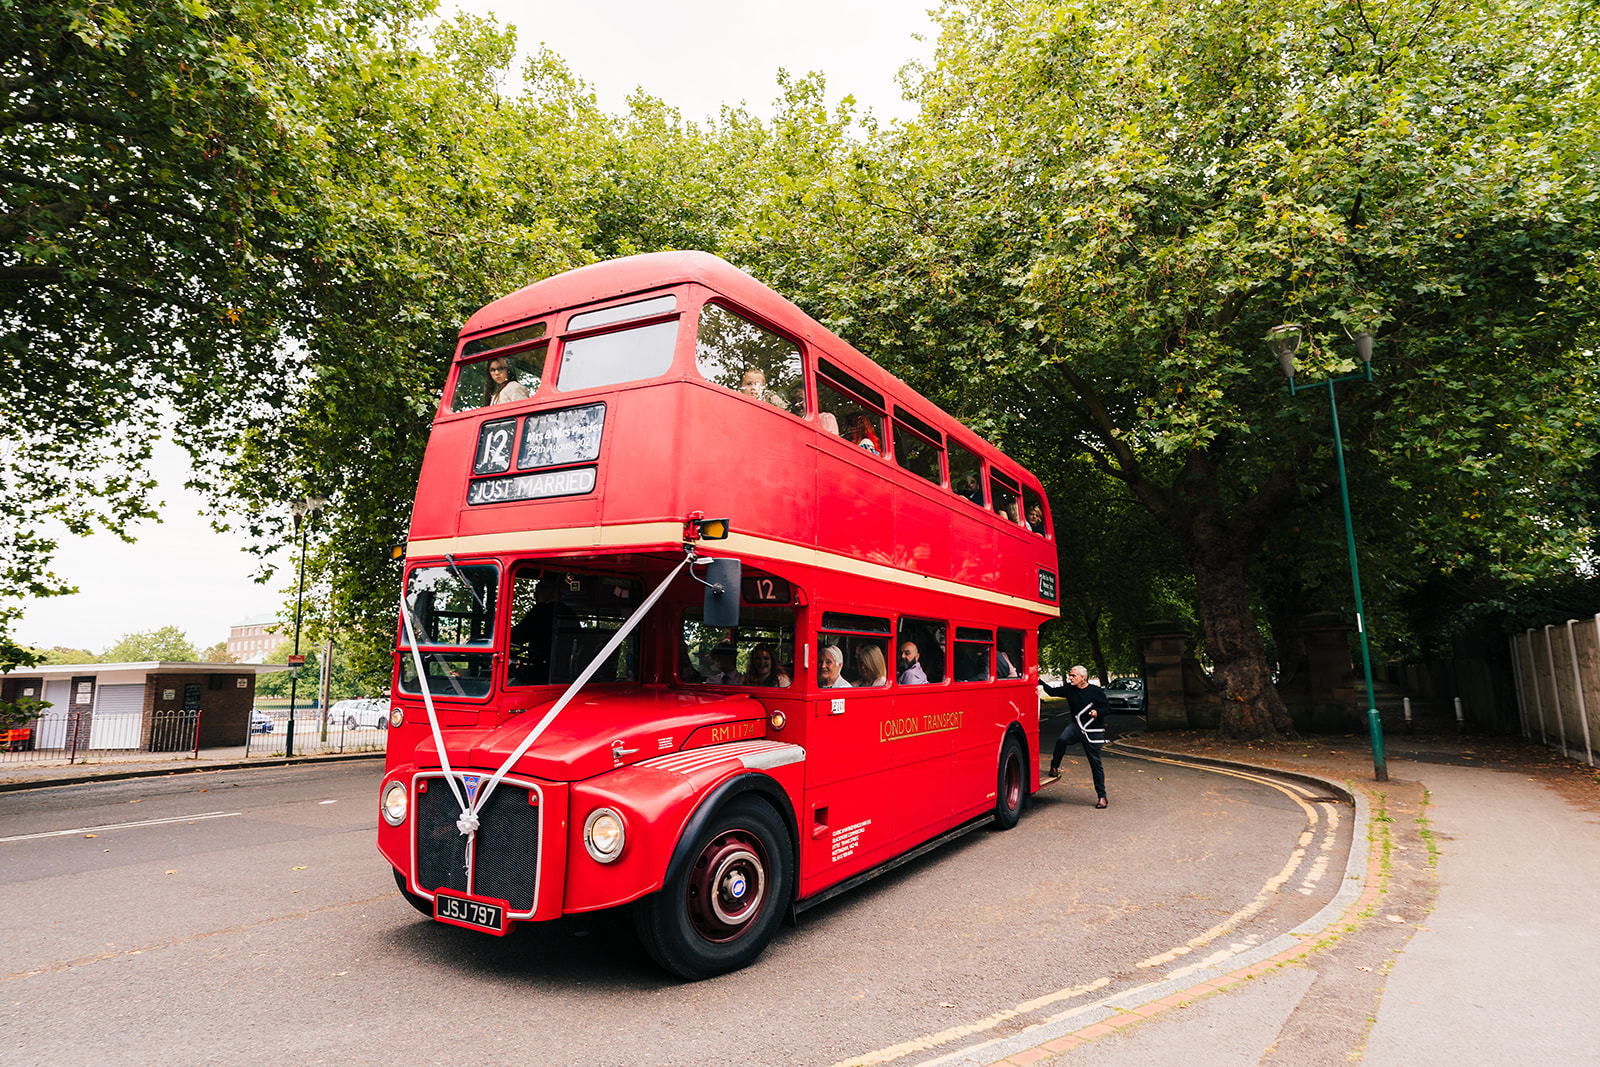 The Brewhouse & Kitchen Wedding Photography - the wedding guests arriving in a big red London bus